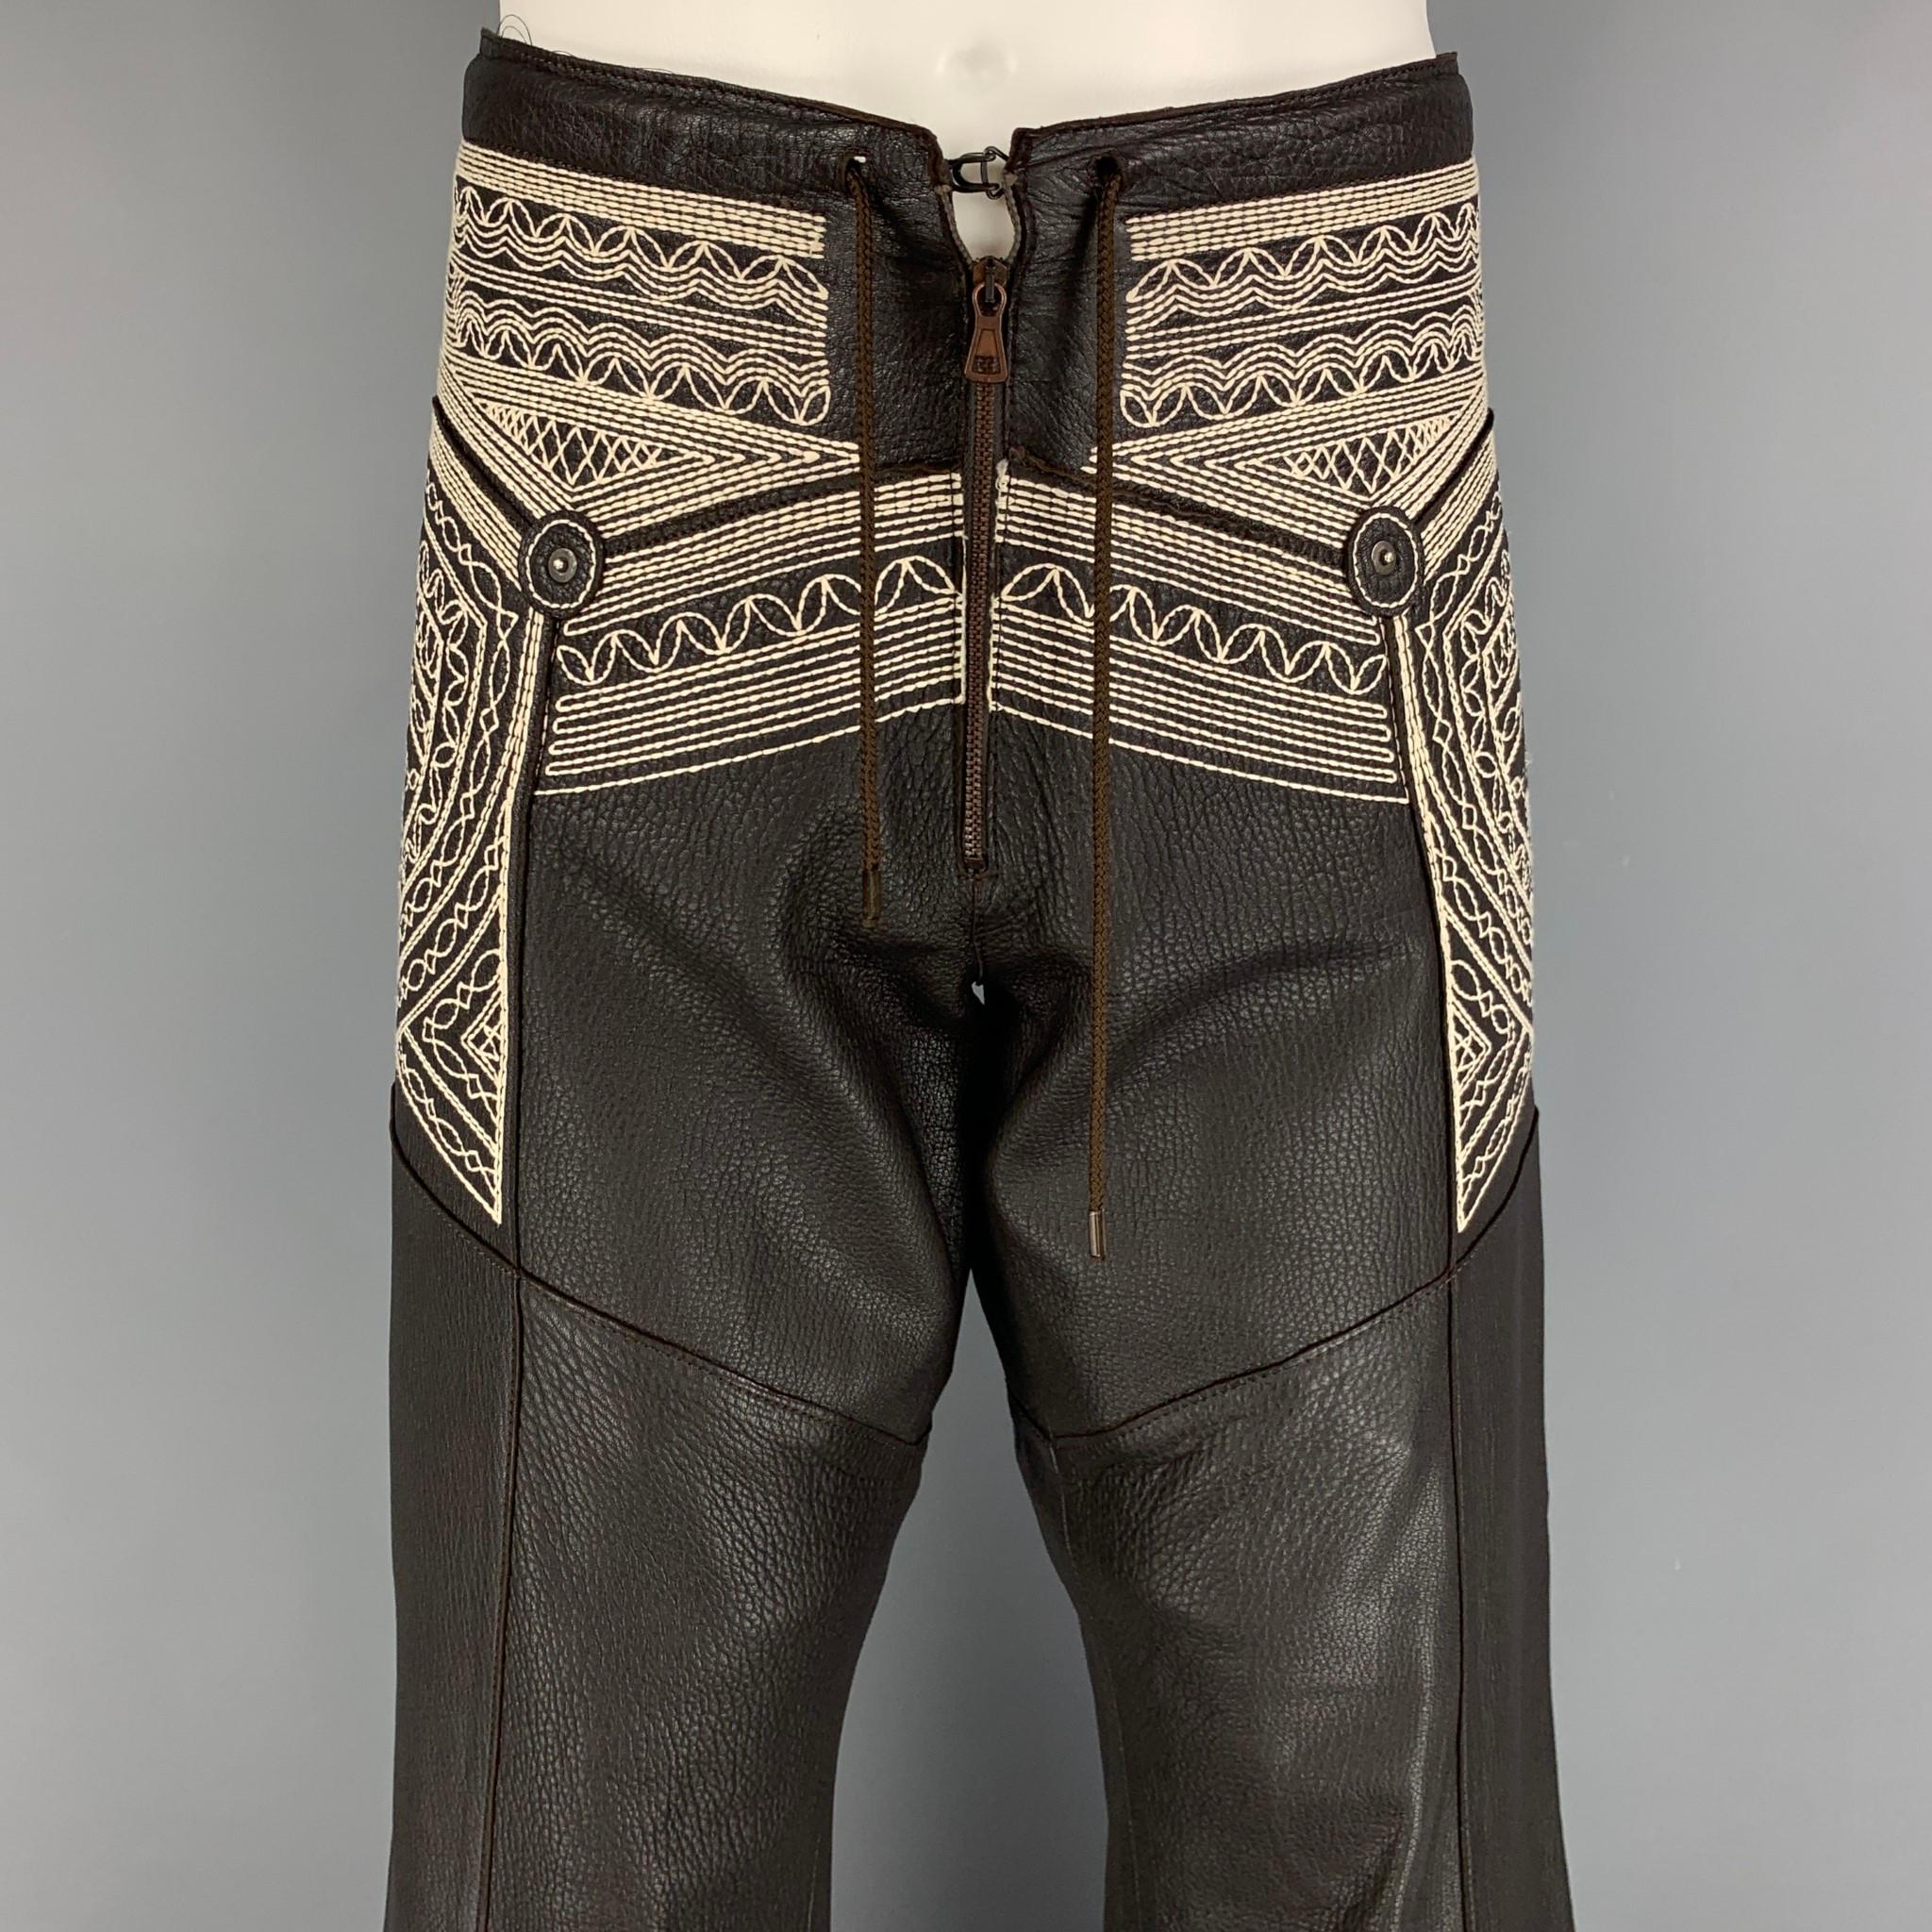 JEAN PAUL GAULTIER pants comes in a brown sheep leather featuring a relaxed fit, white embroidered details, back studded 'Gaultier' design, drawstring, zip fly, and a hook & loop closure. 

Very Good Pre-Owned Condition.
Marked: I 50 / E 50 / GB 40